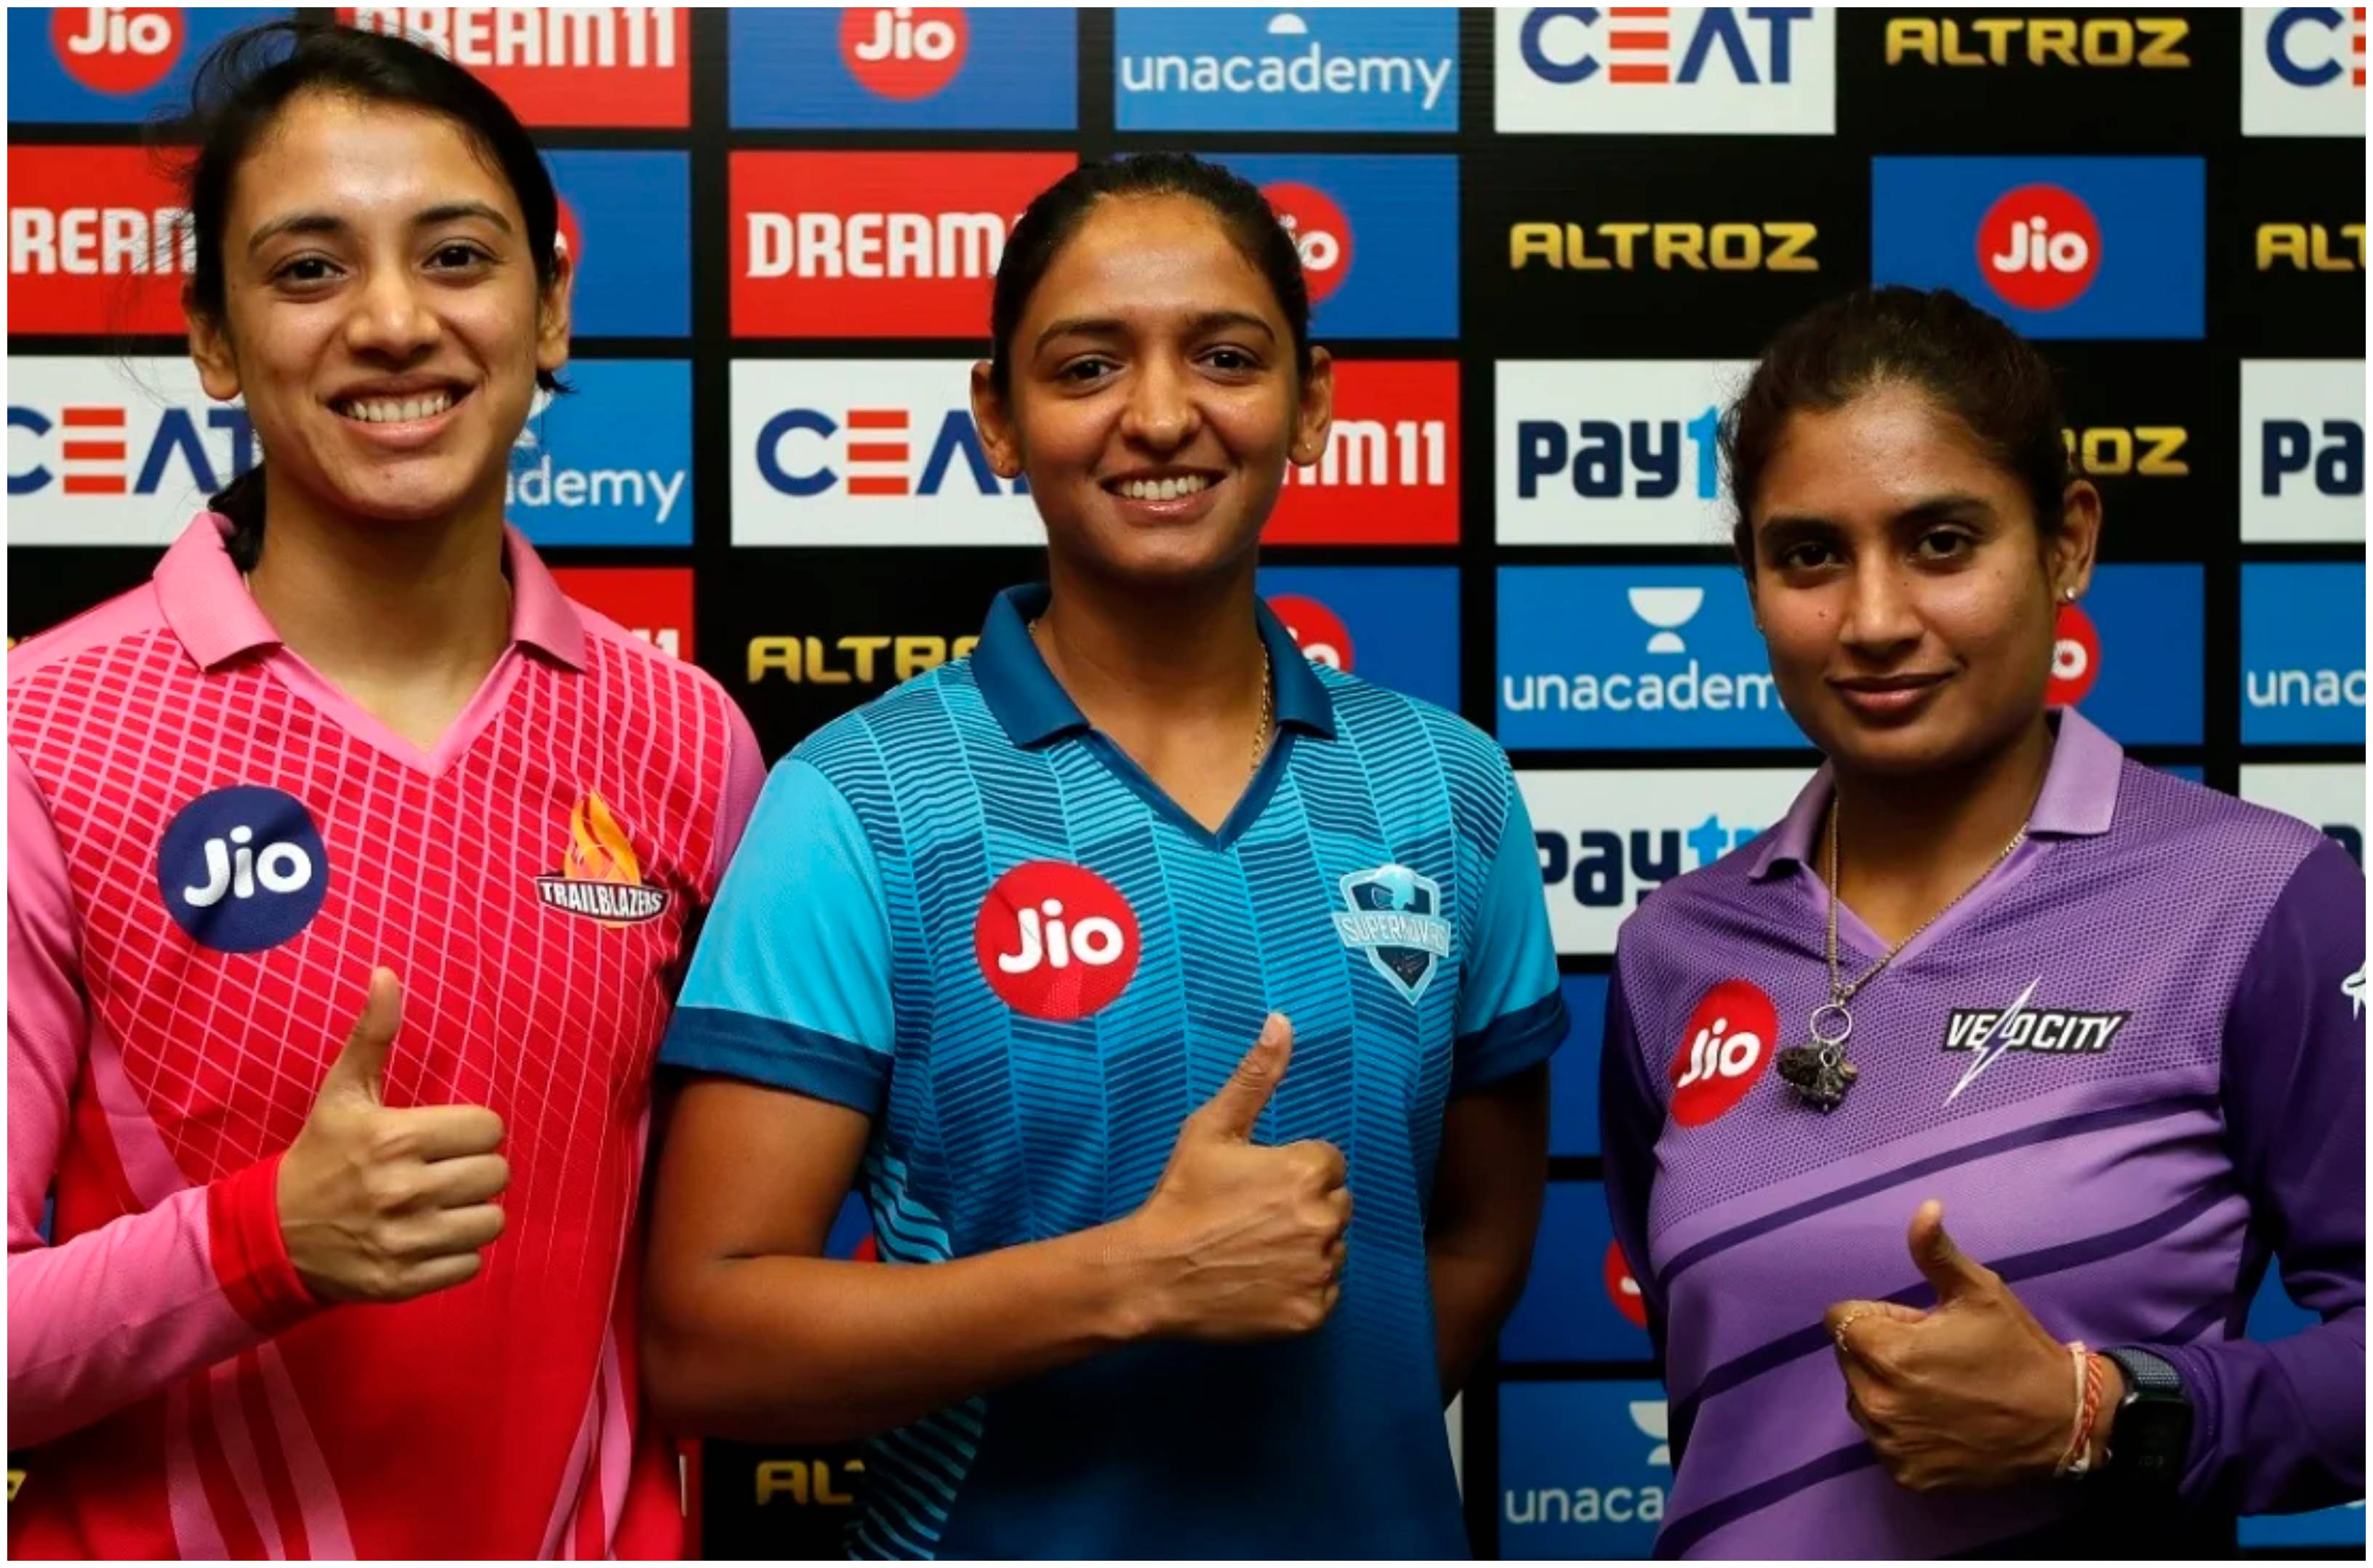 There is a lot of excitement for the inaugural Women's IPL | BCCI